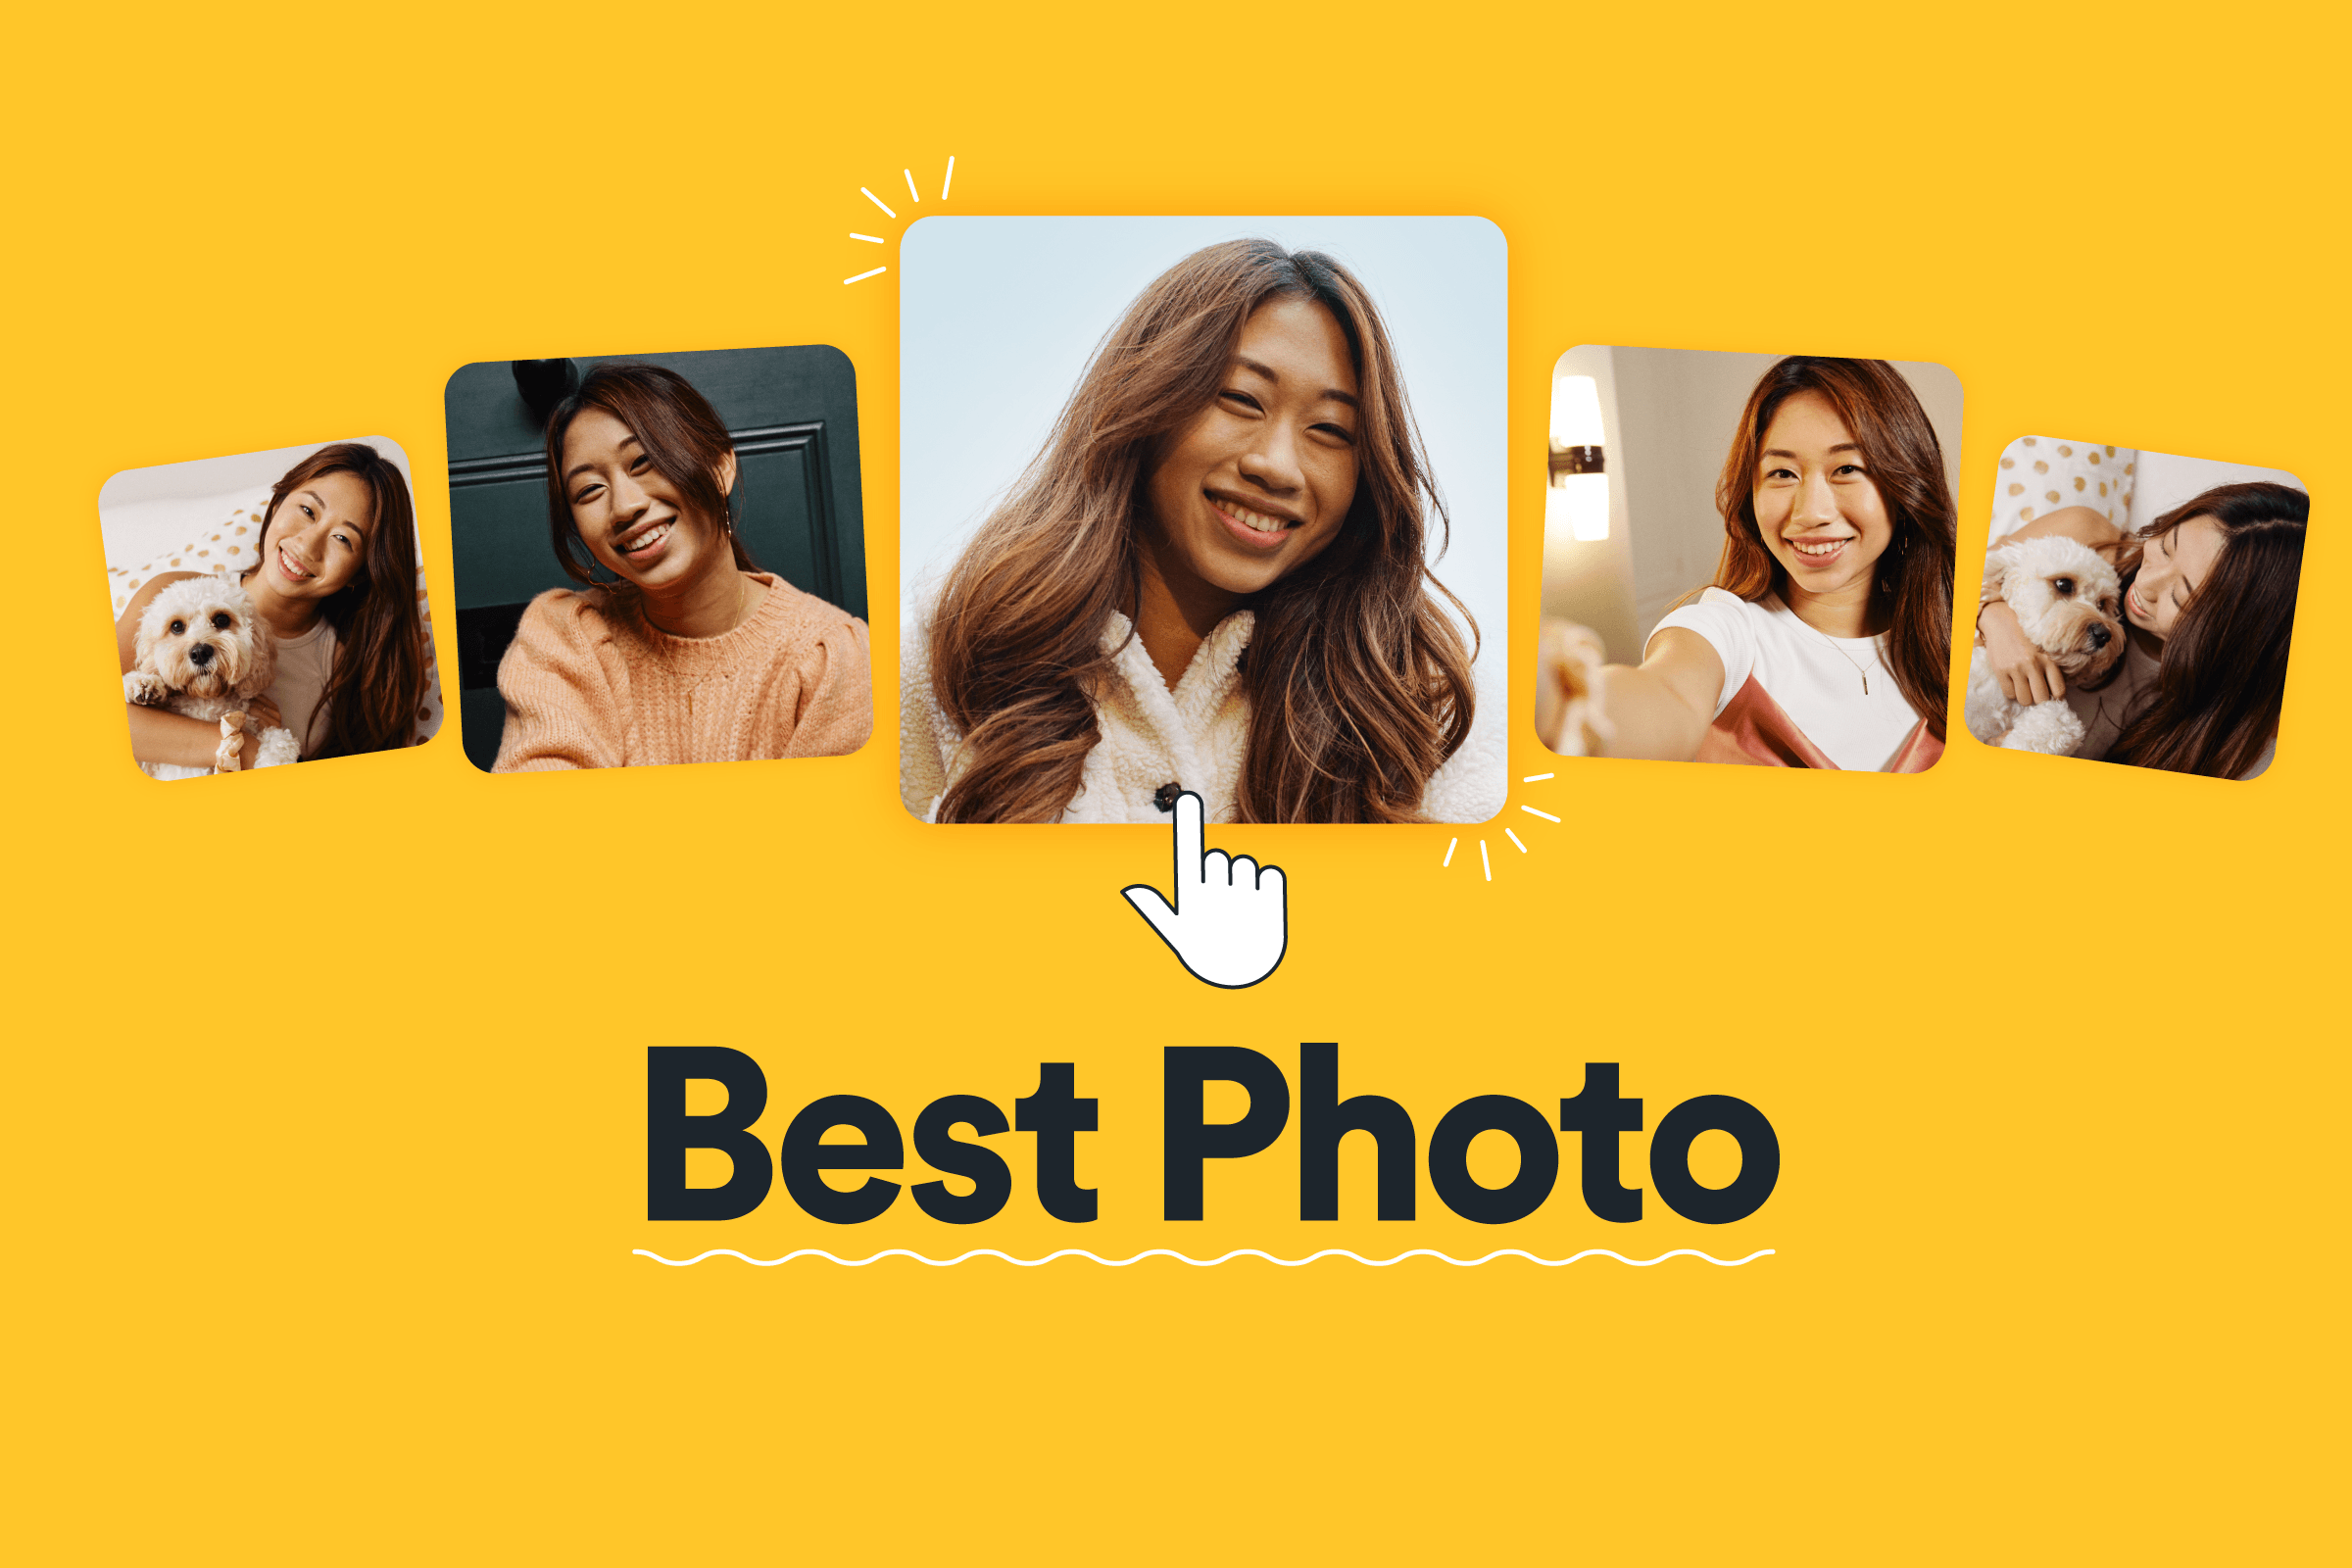 How to Use Bumble’s Best Photo Feature